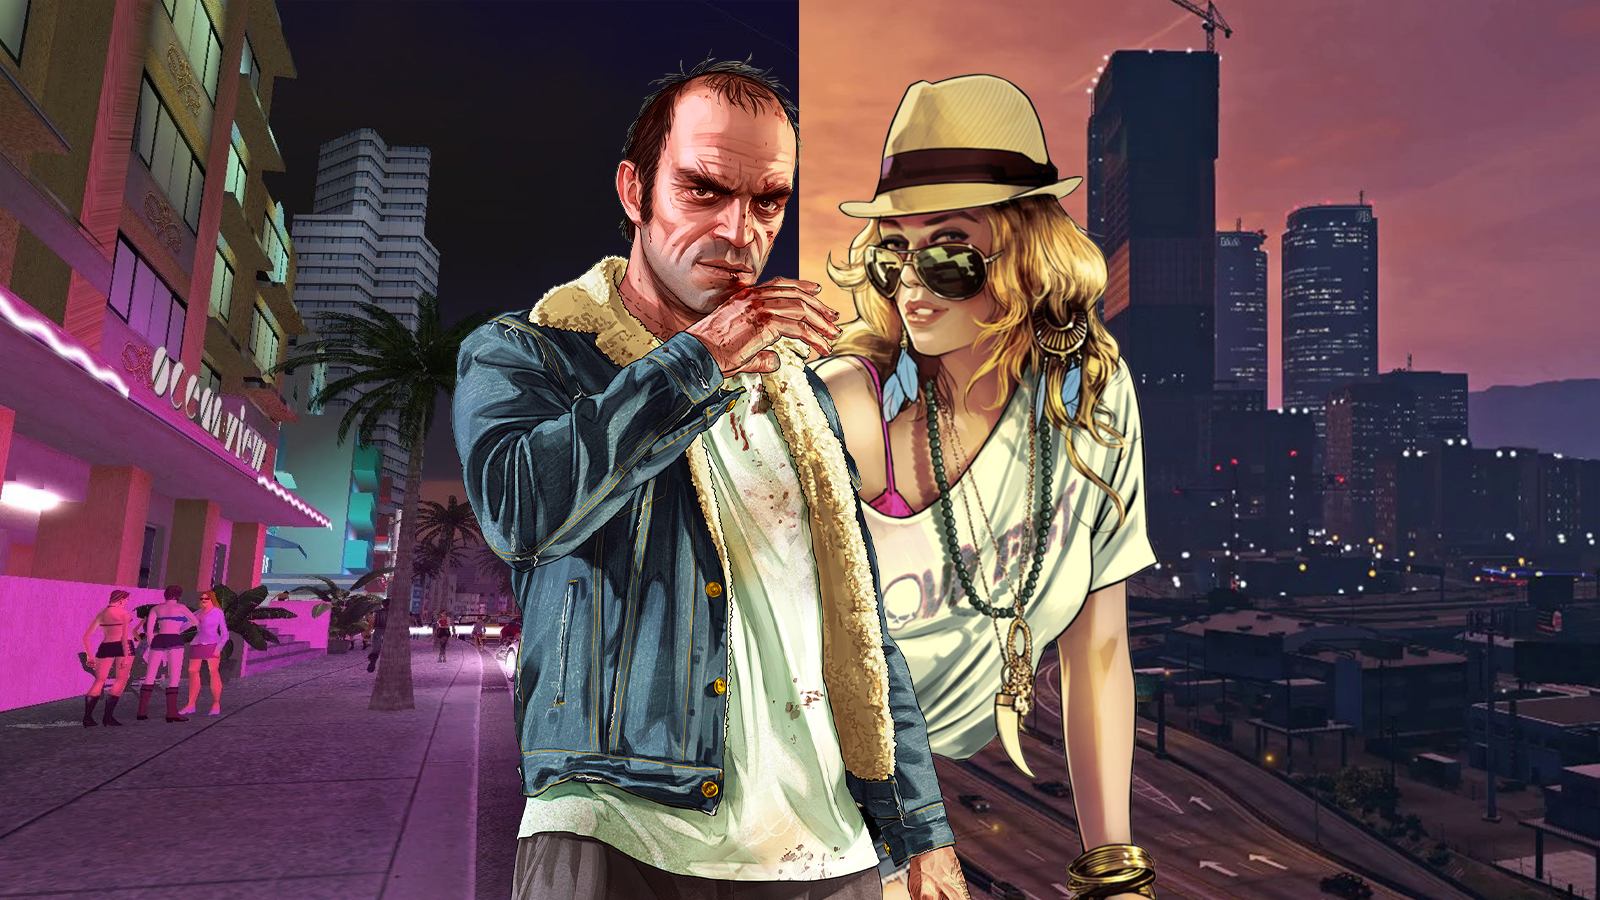 Gta 6 Is Being Accelerated For Early Release